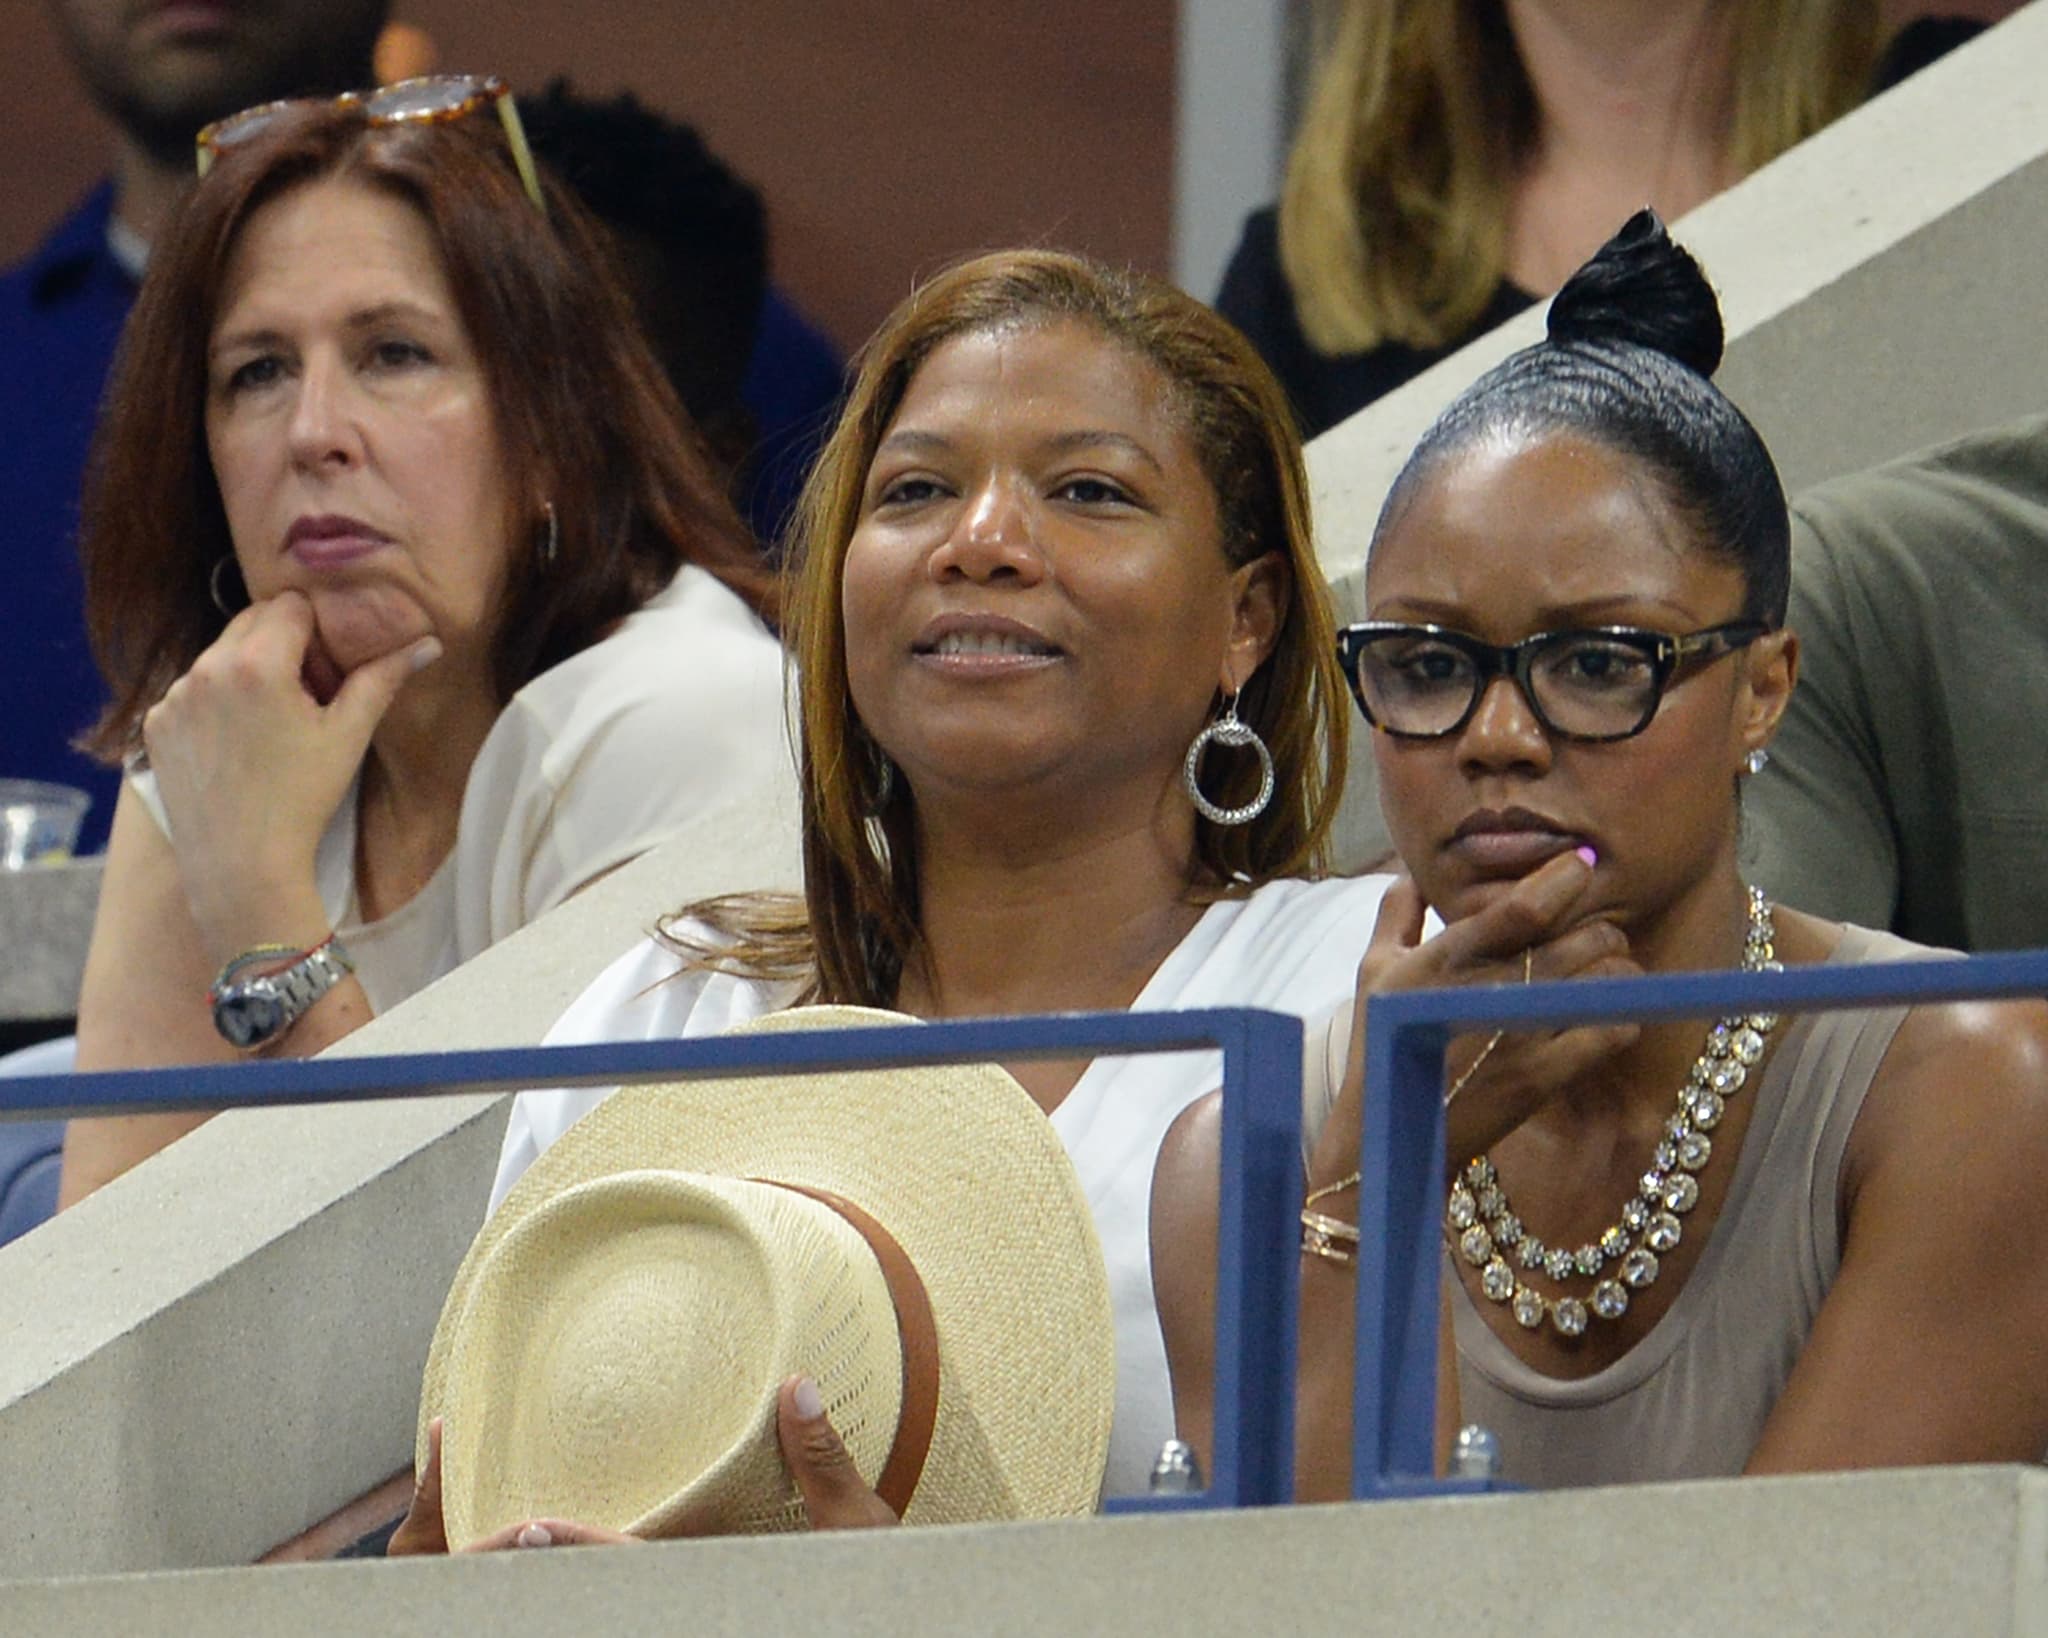 Queen Latifah and Eboni Nichols, pictured at the 2016 US Open, reportedly welcomed a child together in 2019